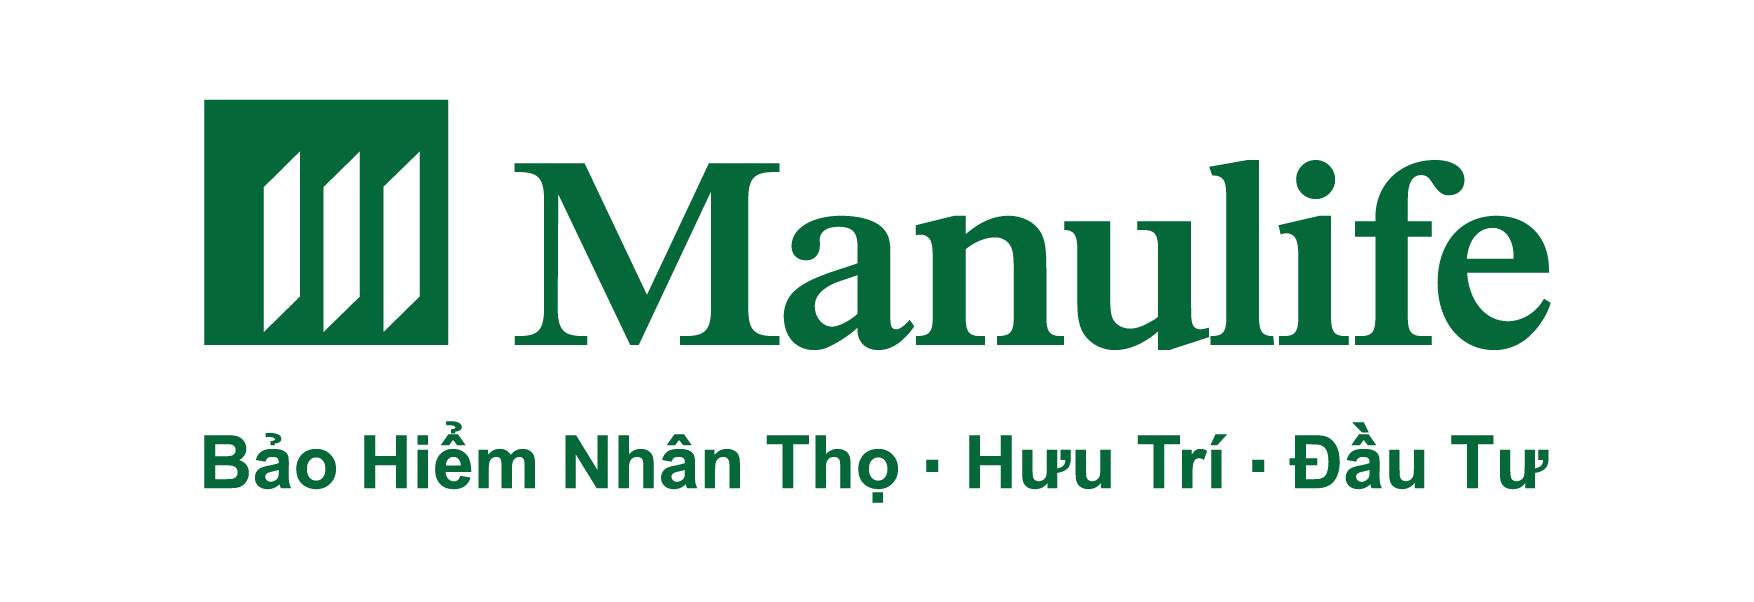 Manulife Logo - Manulife (Vietnam) Limited IT Jobs, Careers & Recruitment | topITworks